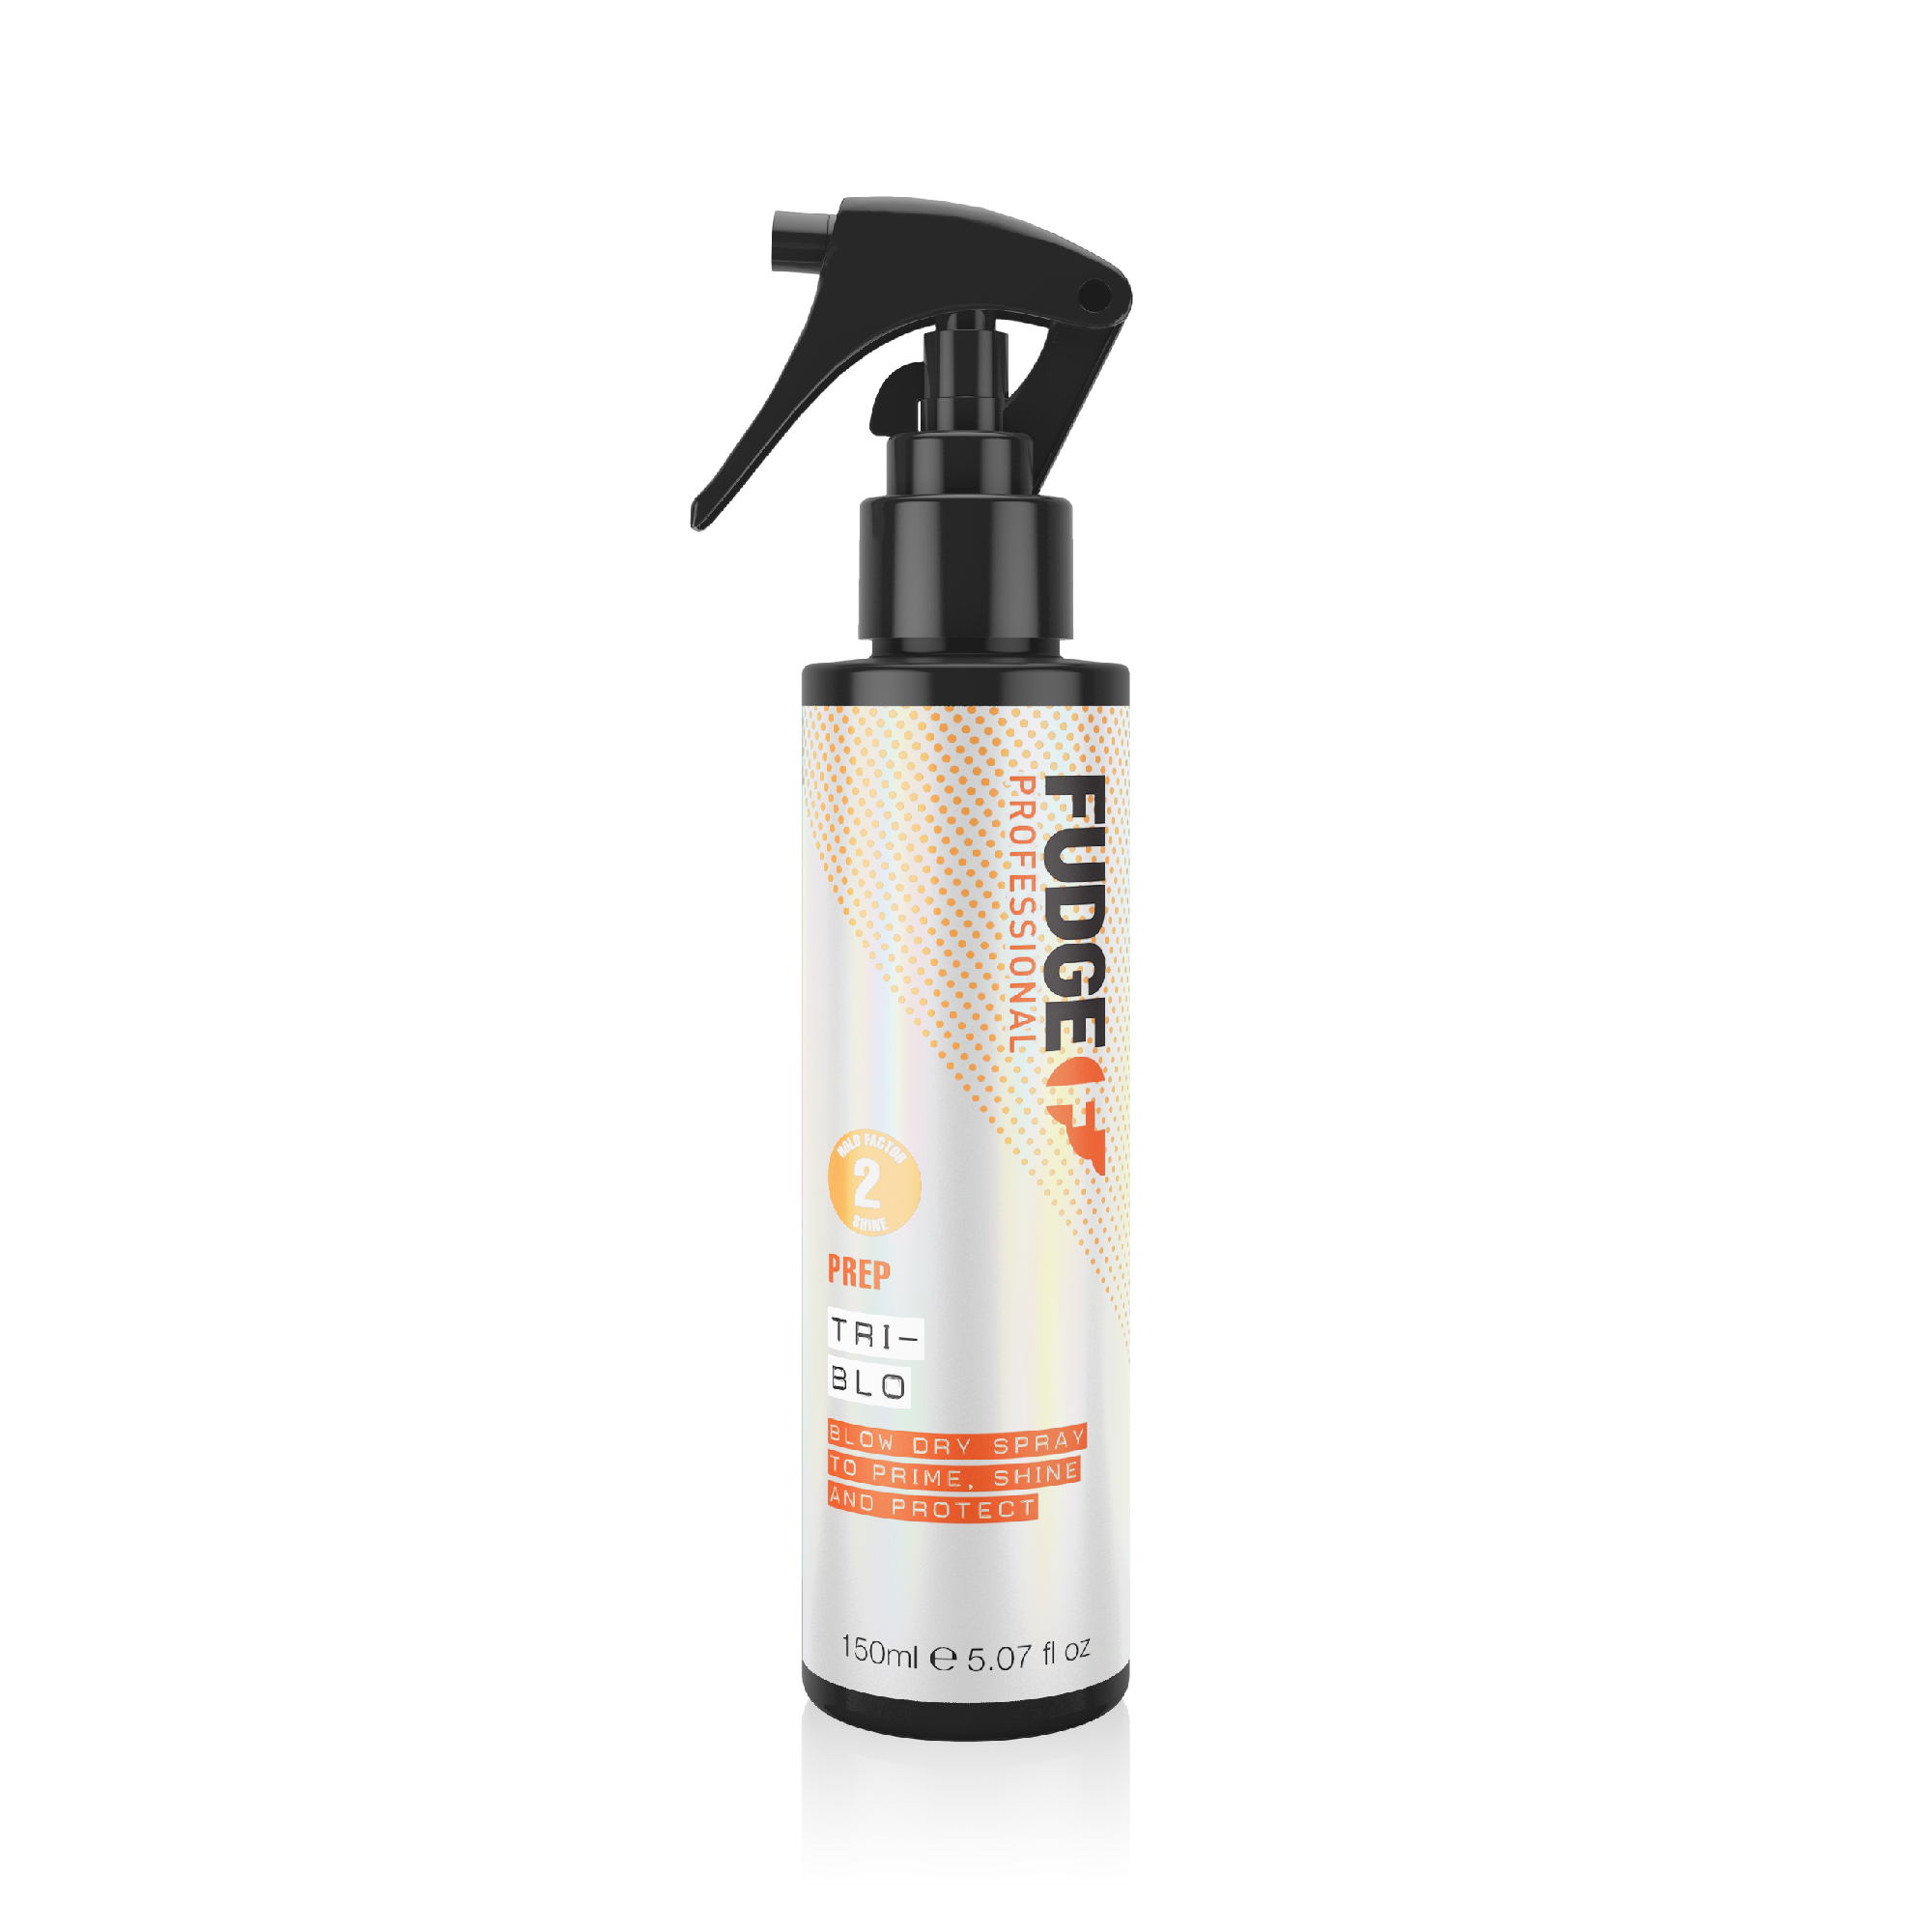 Fudge Tri-Blo Spray 150ml - Hair products New Zealand | Nation wide  hairdressing & hair care group